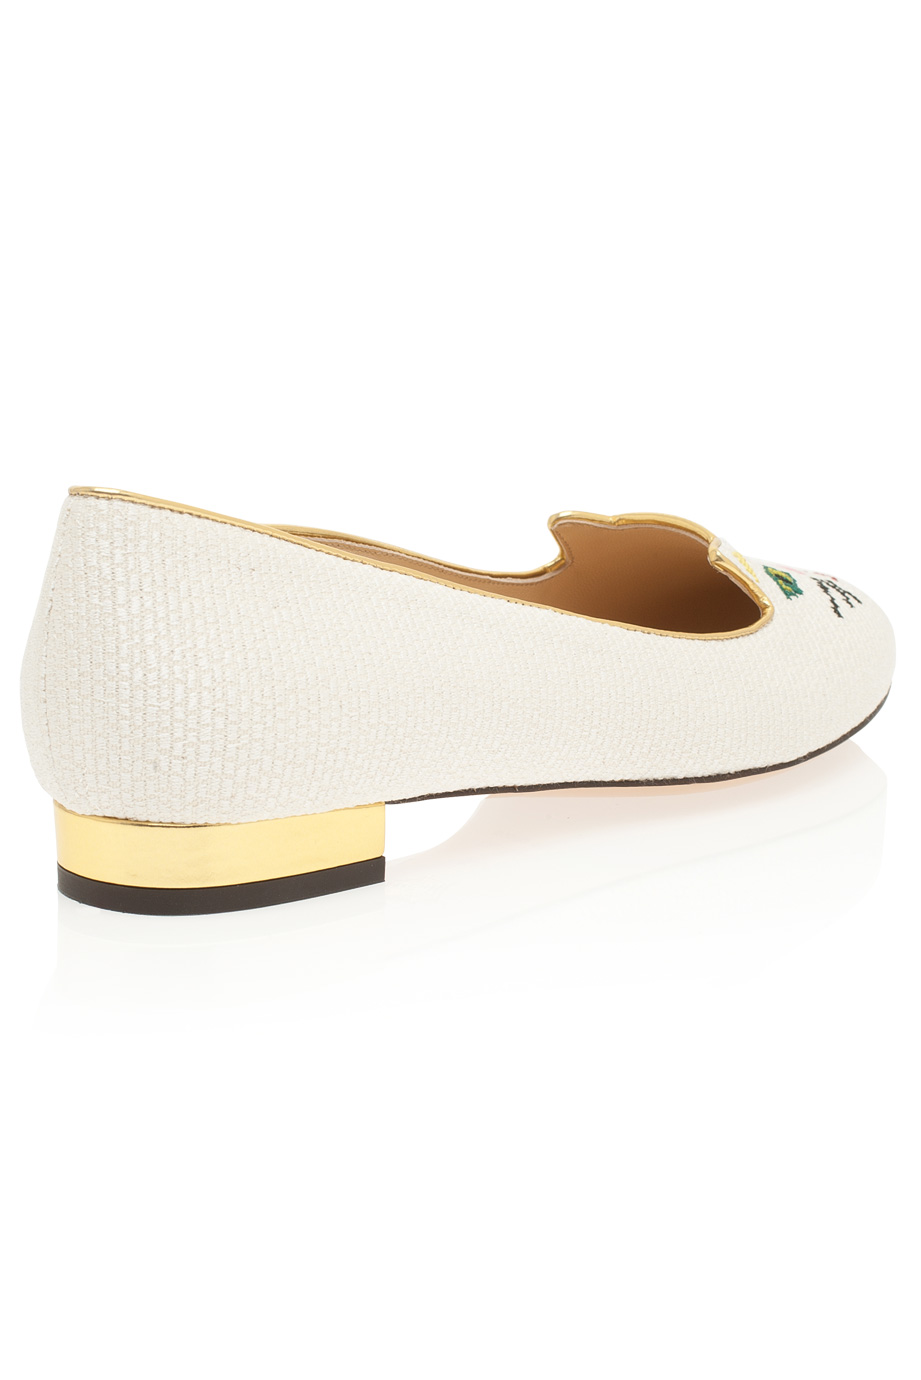 Charlotte Olympia Cross Stitch Kitty Flats in Ivory (White) - Lyst